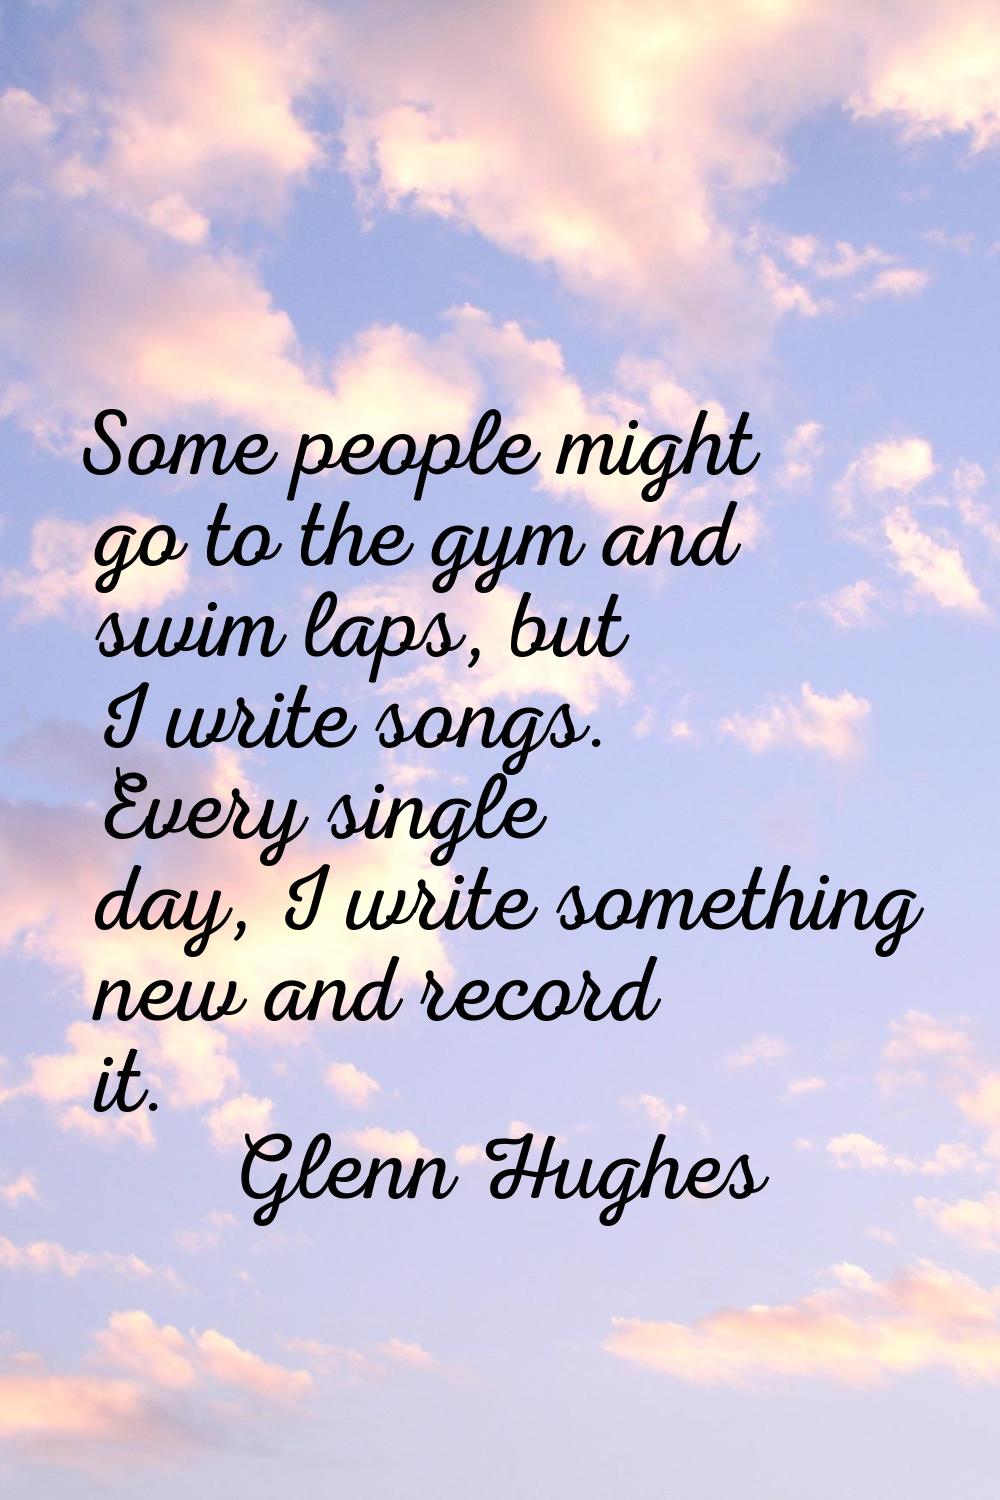 Some people might go to the gym and swim laps, but I write songs. Every single day, I write somethi